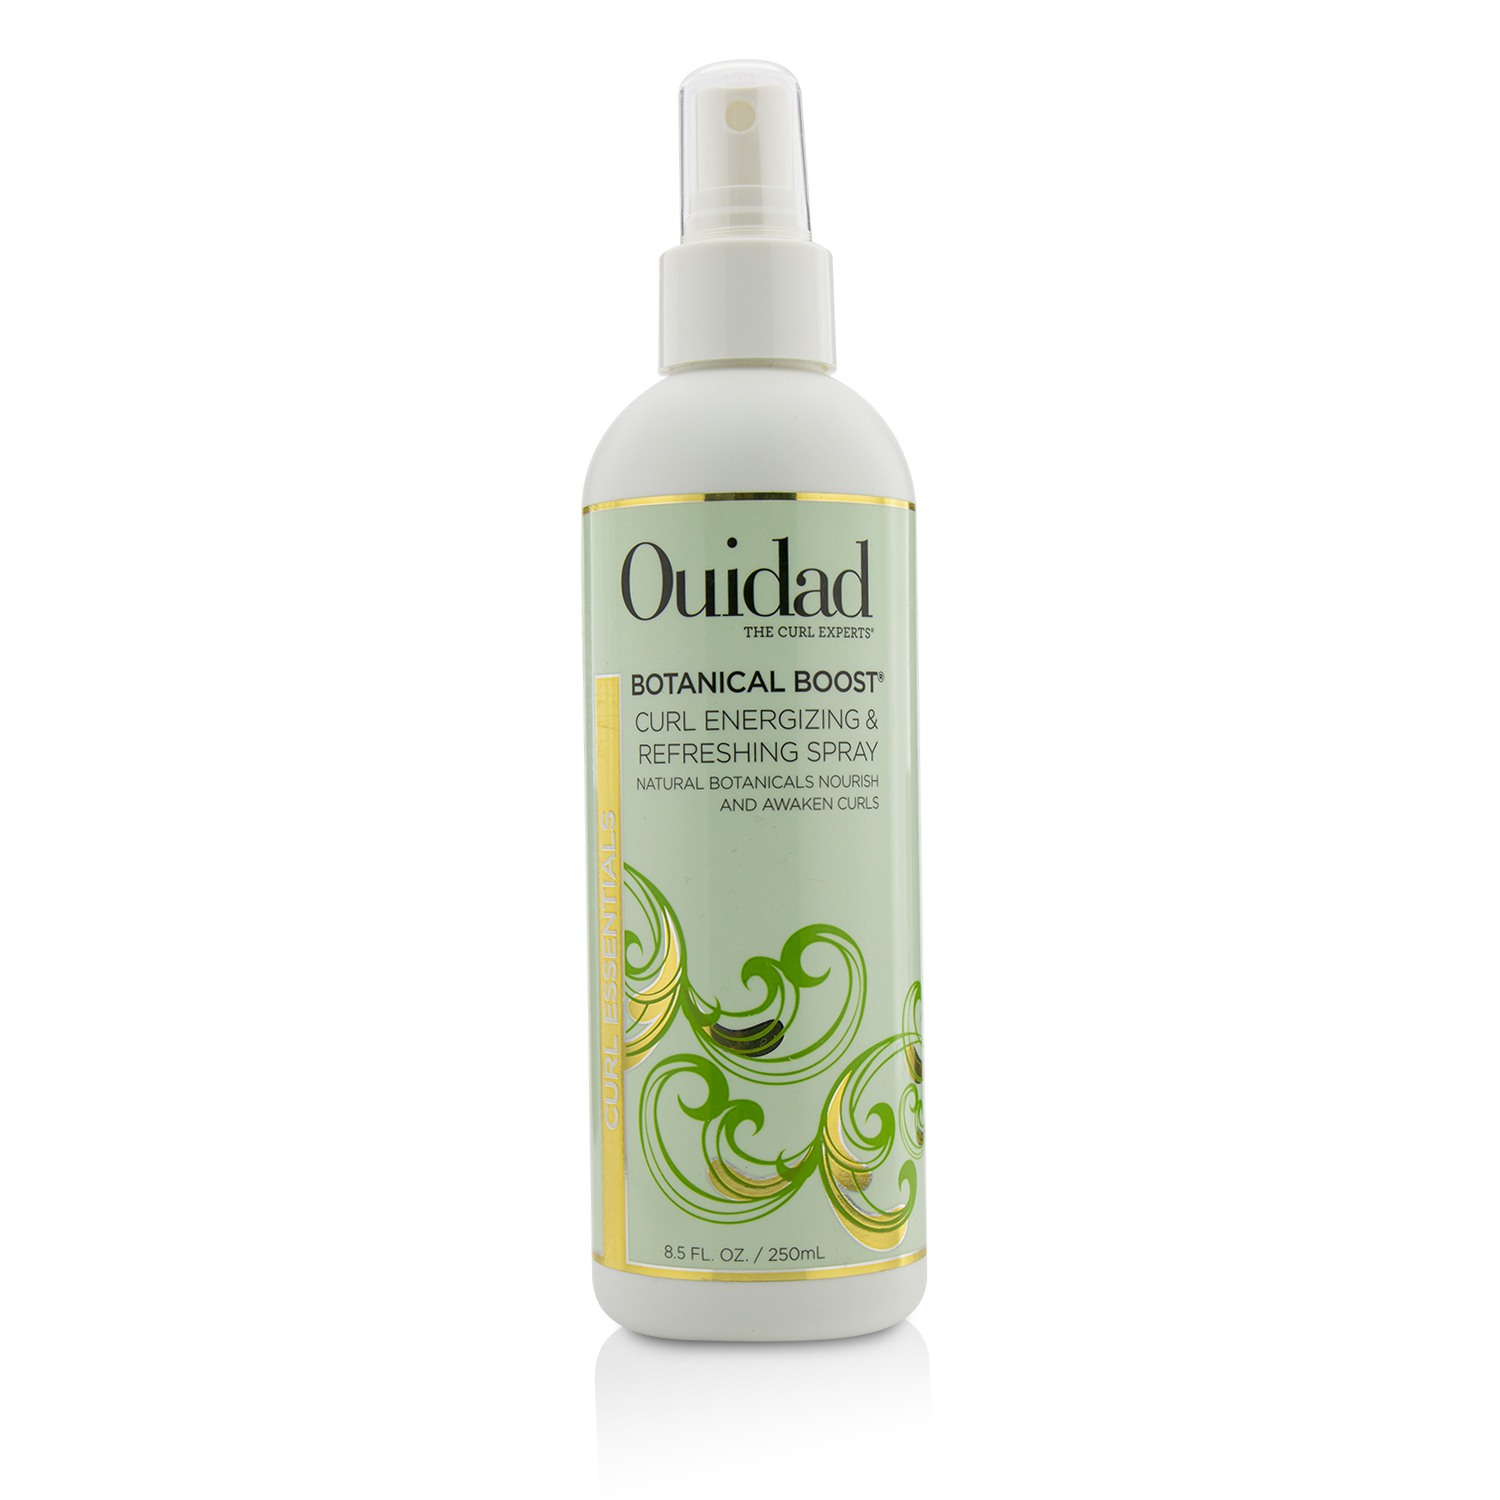 Botanical Boost Curl Energizing & Refreshing Spray (All Curl Types) Ouidad Image